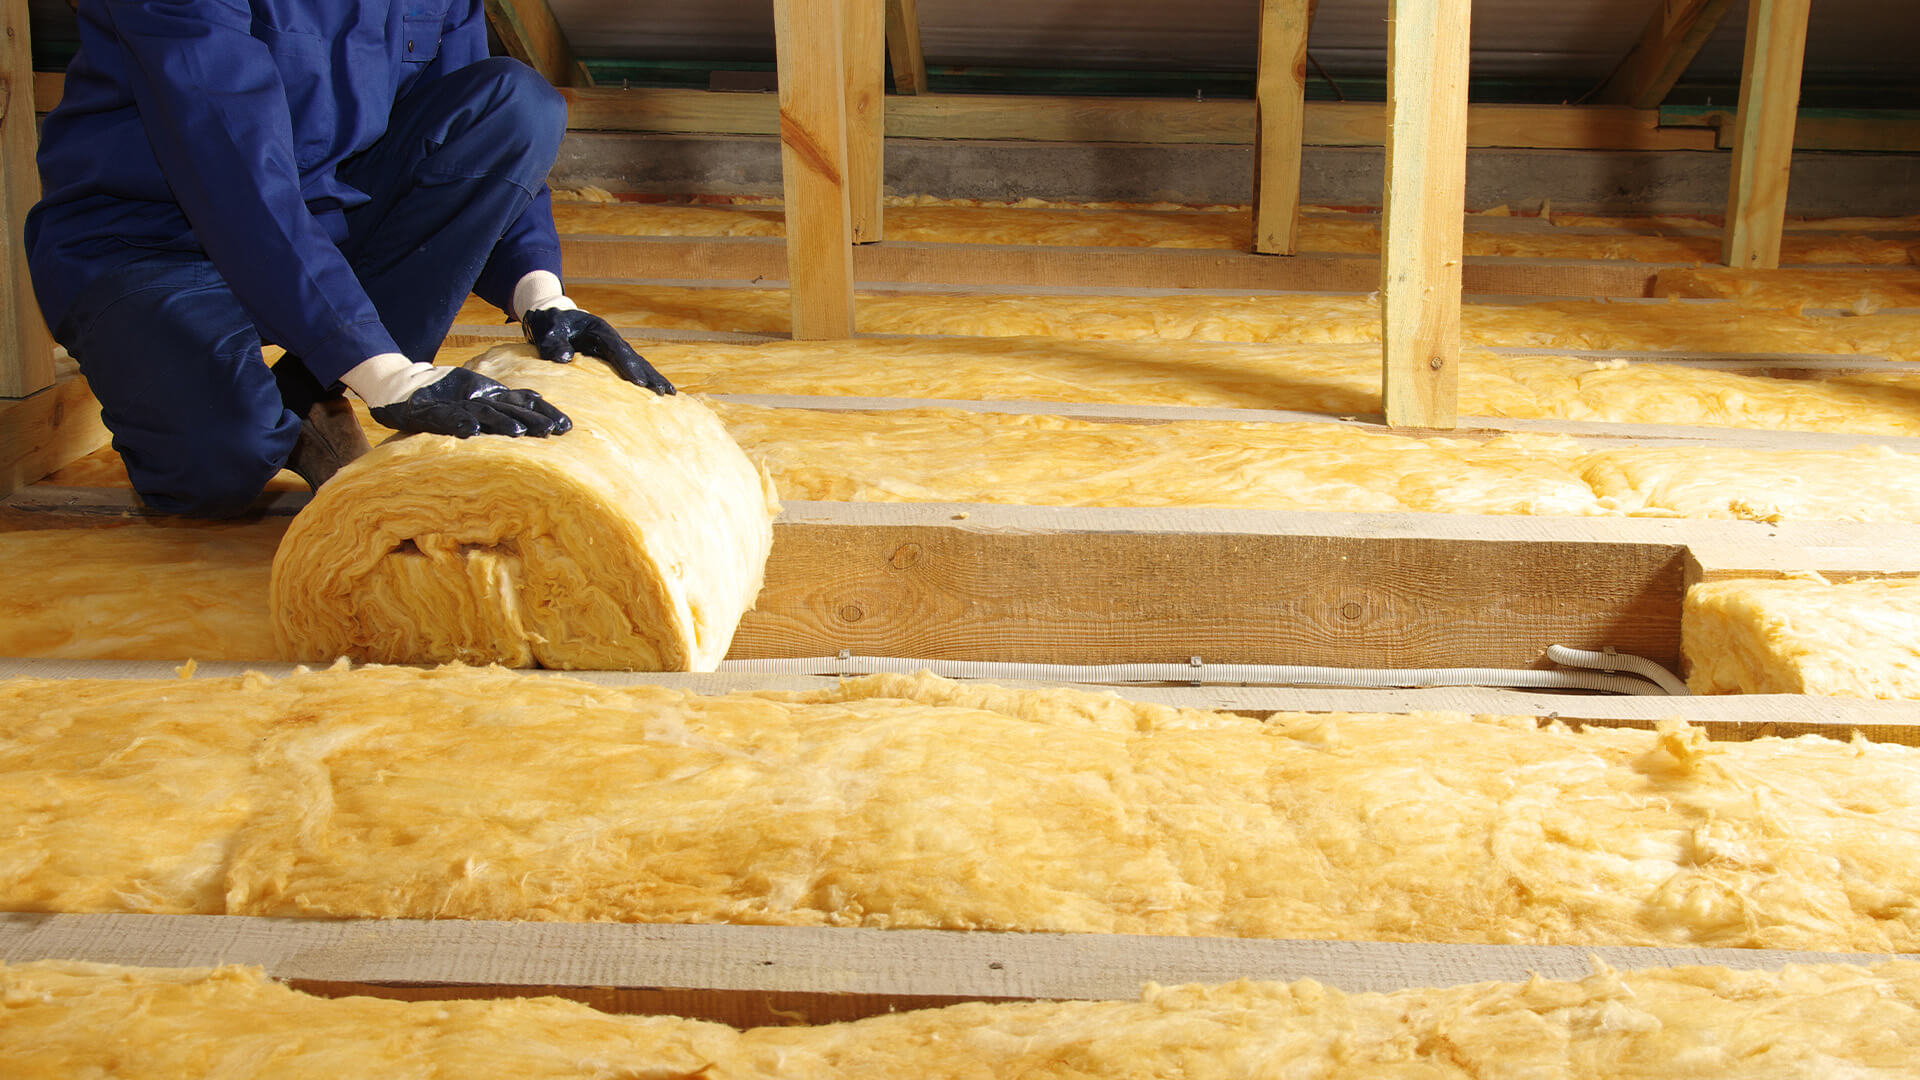 A man is exploring grants and programs for energy efficiency in revitalizing home insulation.